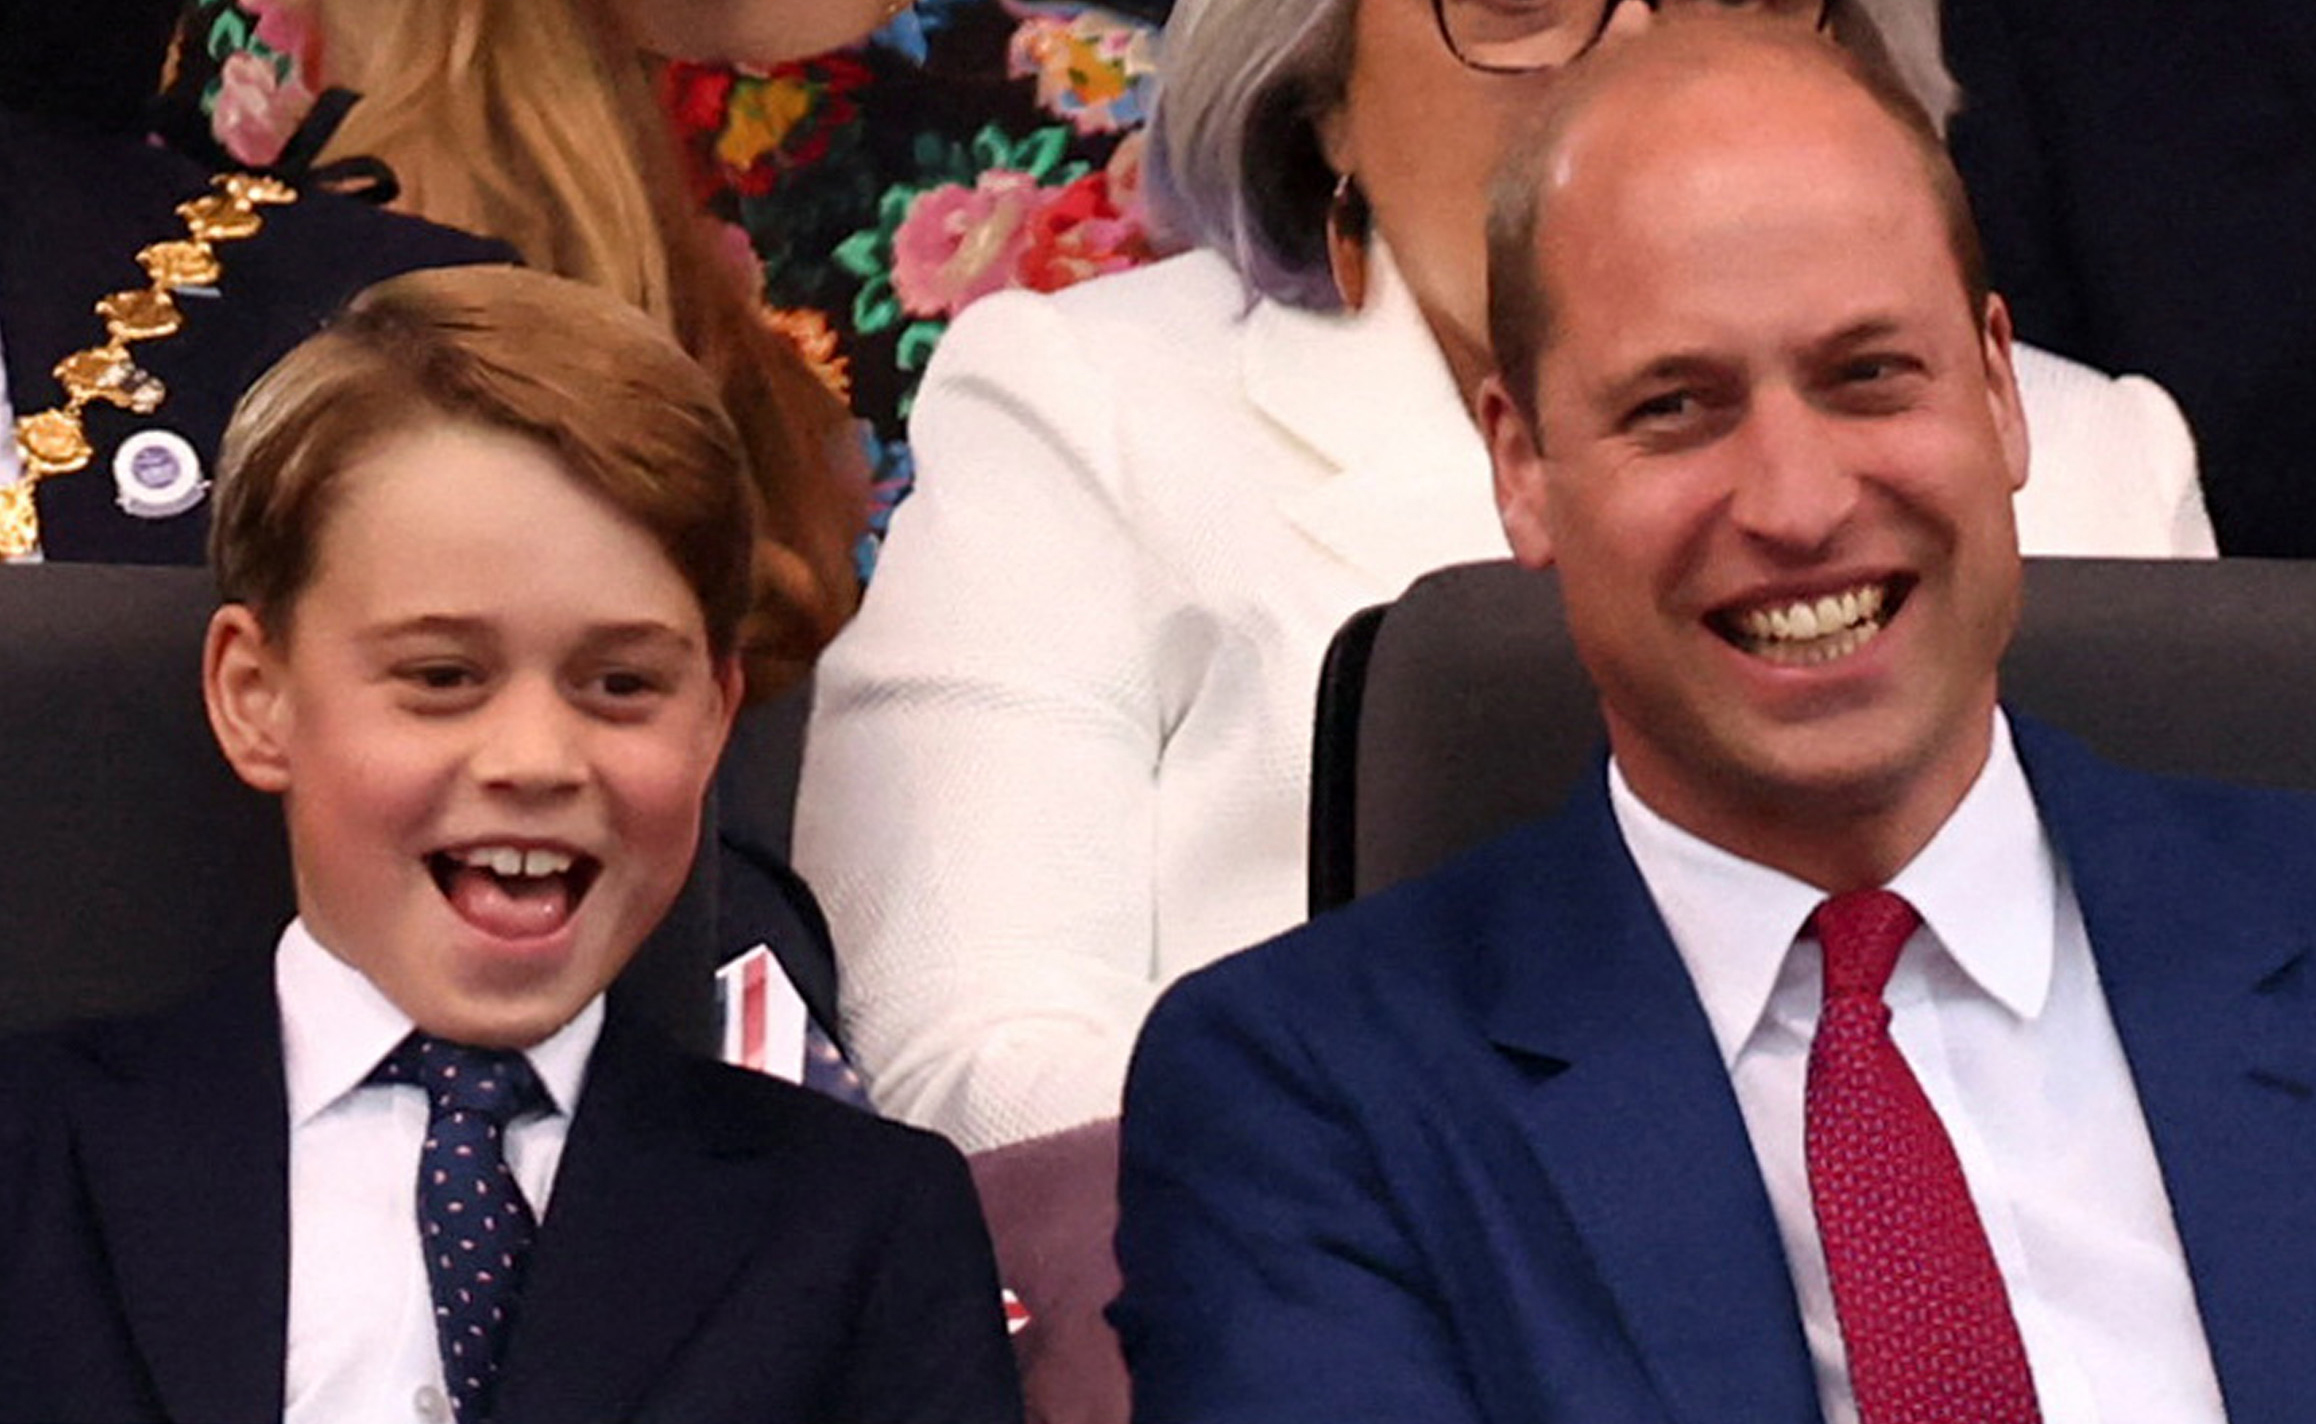 The sweet way Prince George is following in his father’s conservationist footsteps